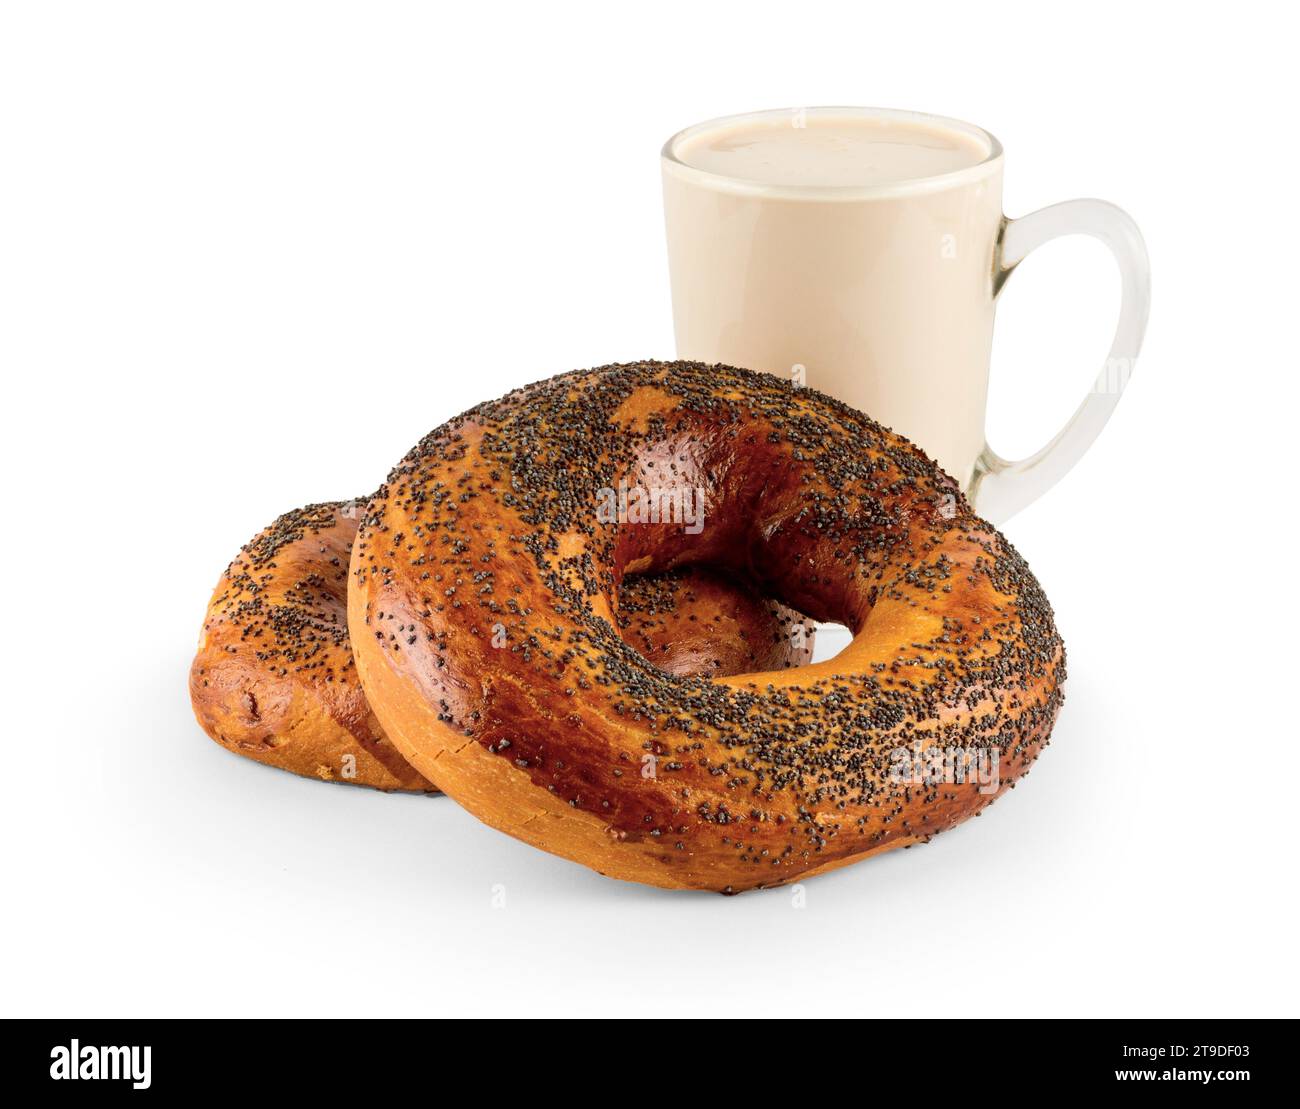 Two bagel with poppy seeds and cup of fermented baked milk, isolated on white background Stock Photo